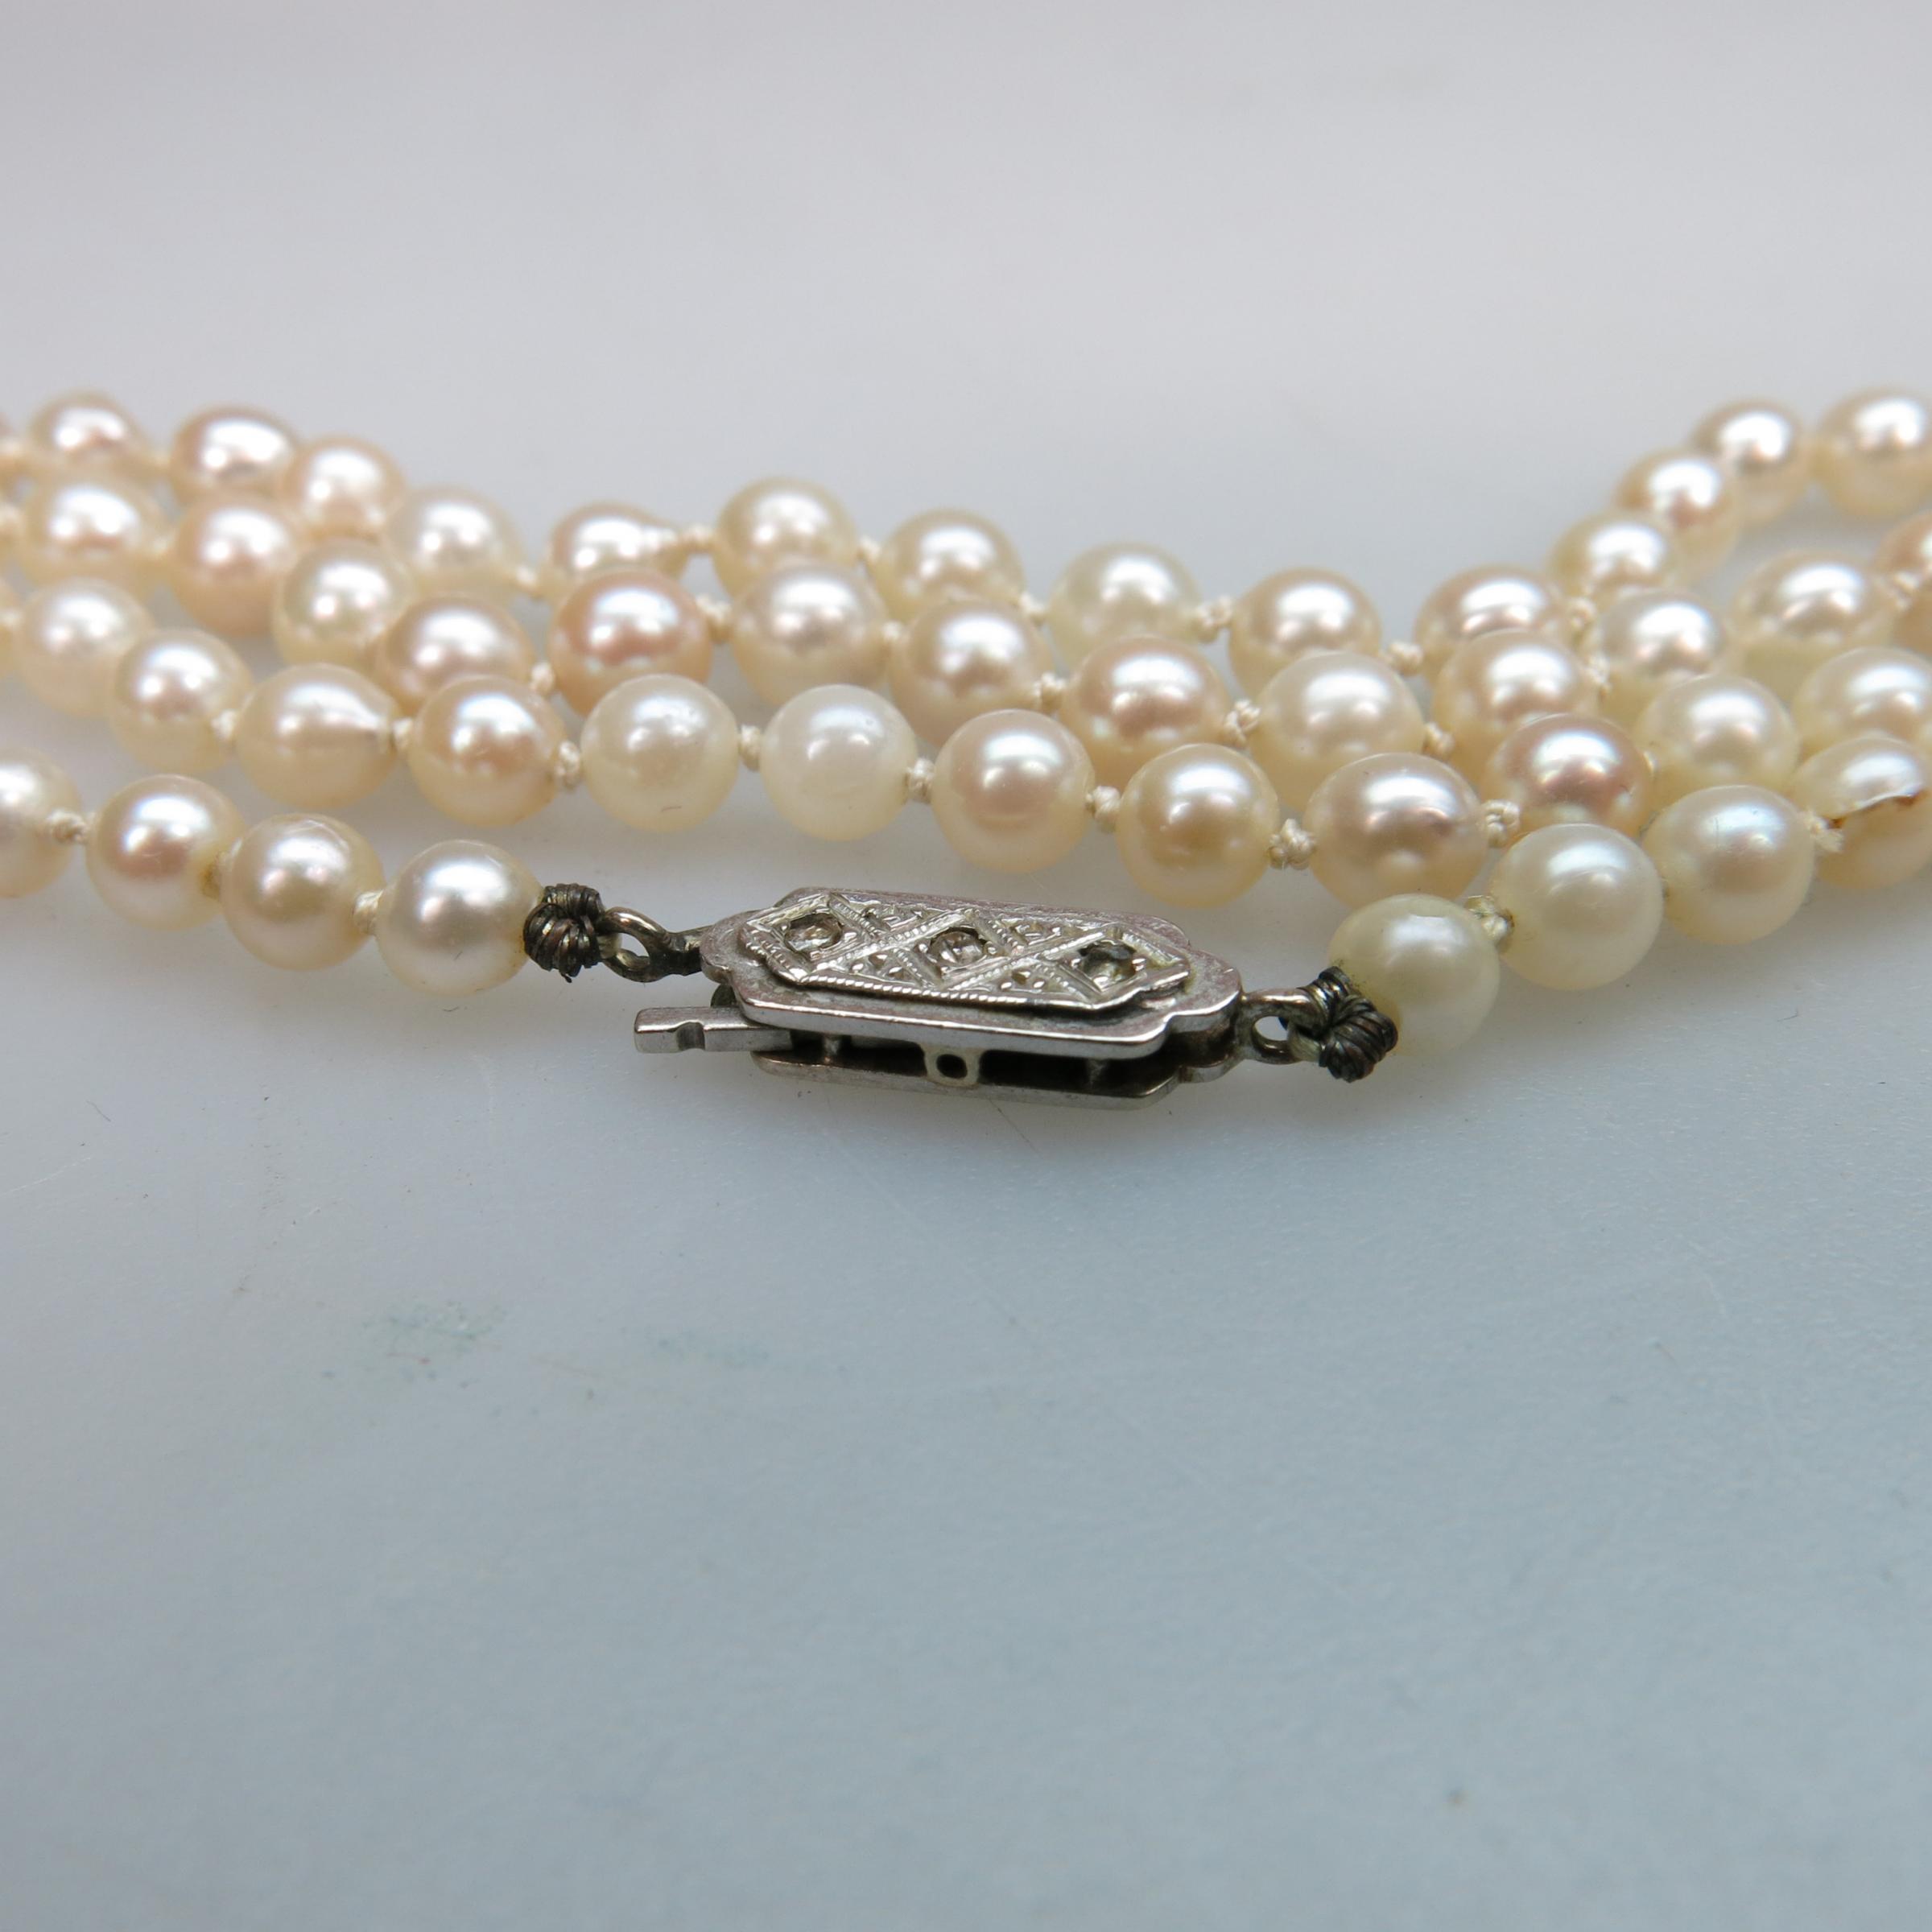 Single Strand Graduated Cultured Pearl Necklace